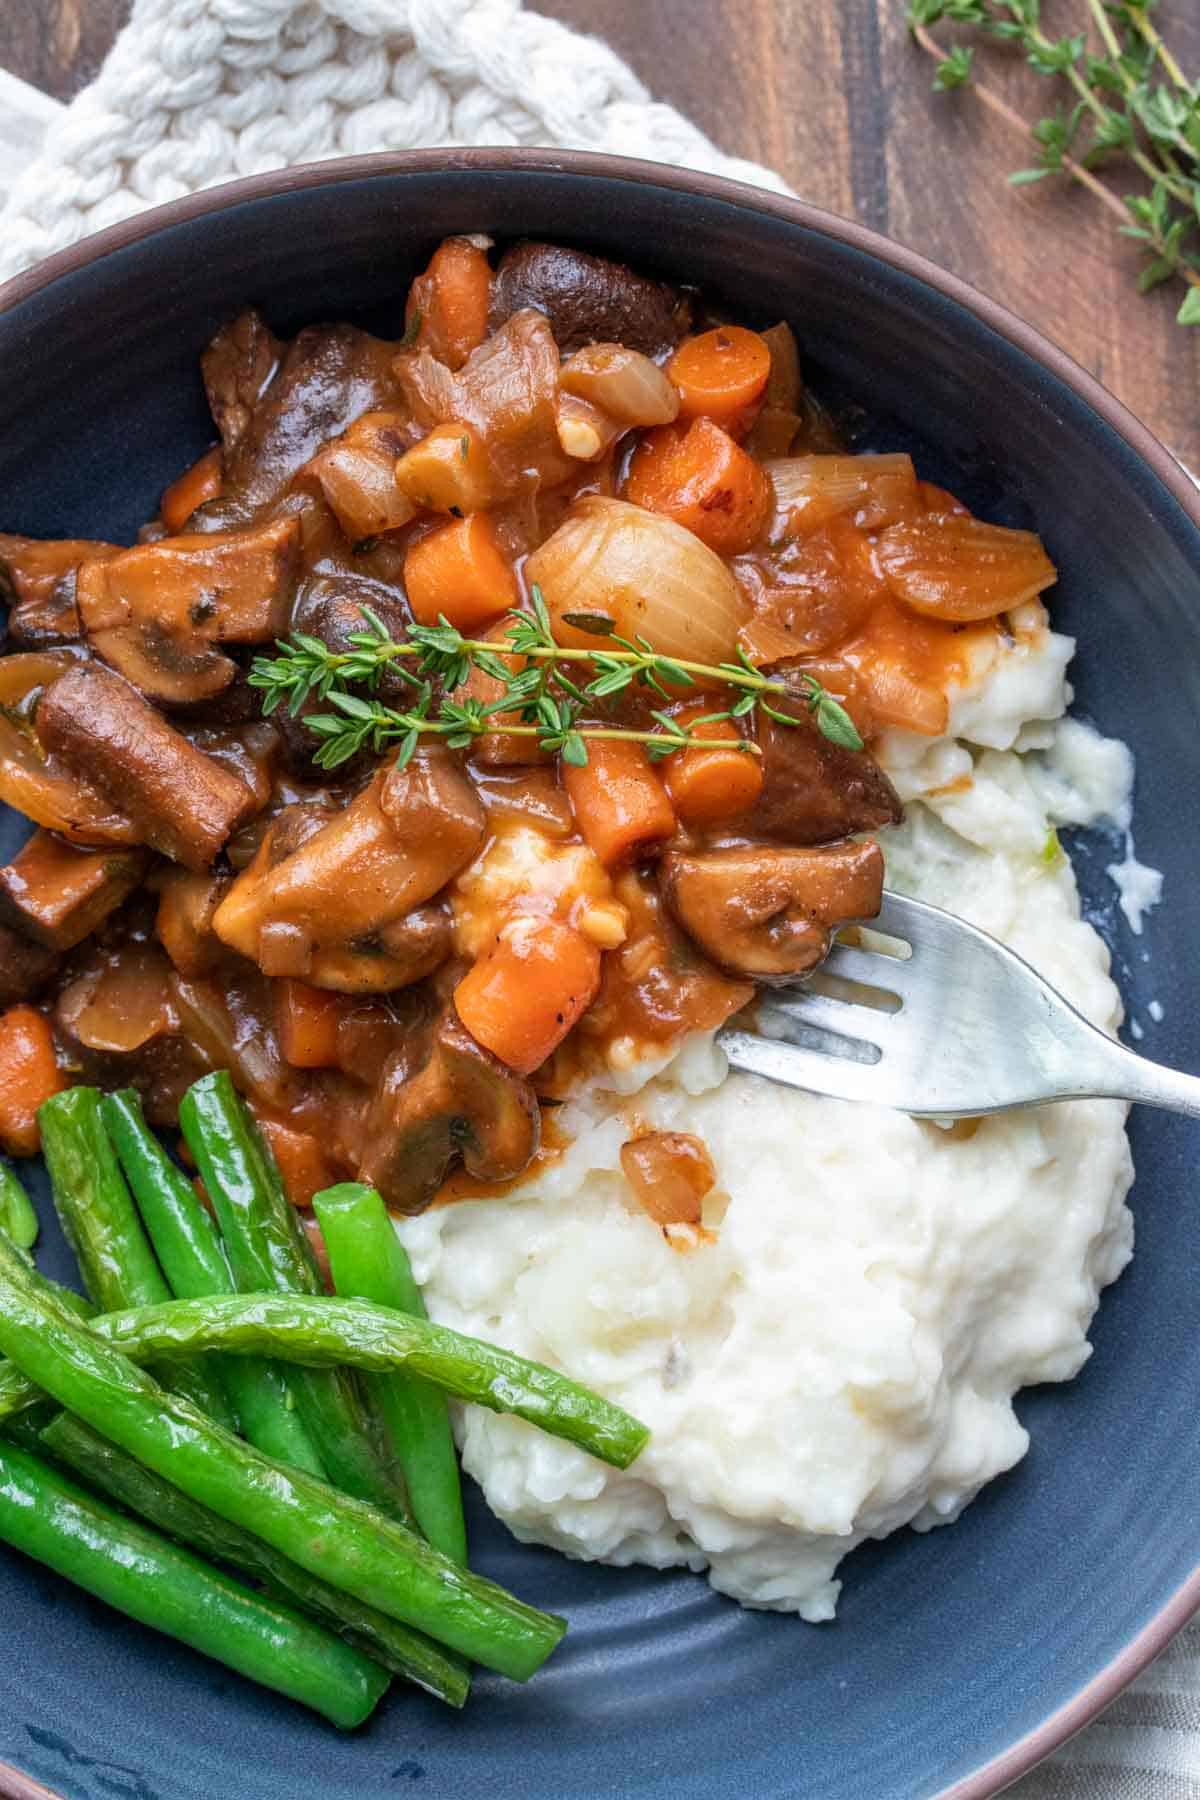 Fork getting a bite of mushroom bourguignon and mashed potatoes from a blue bowl